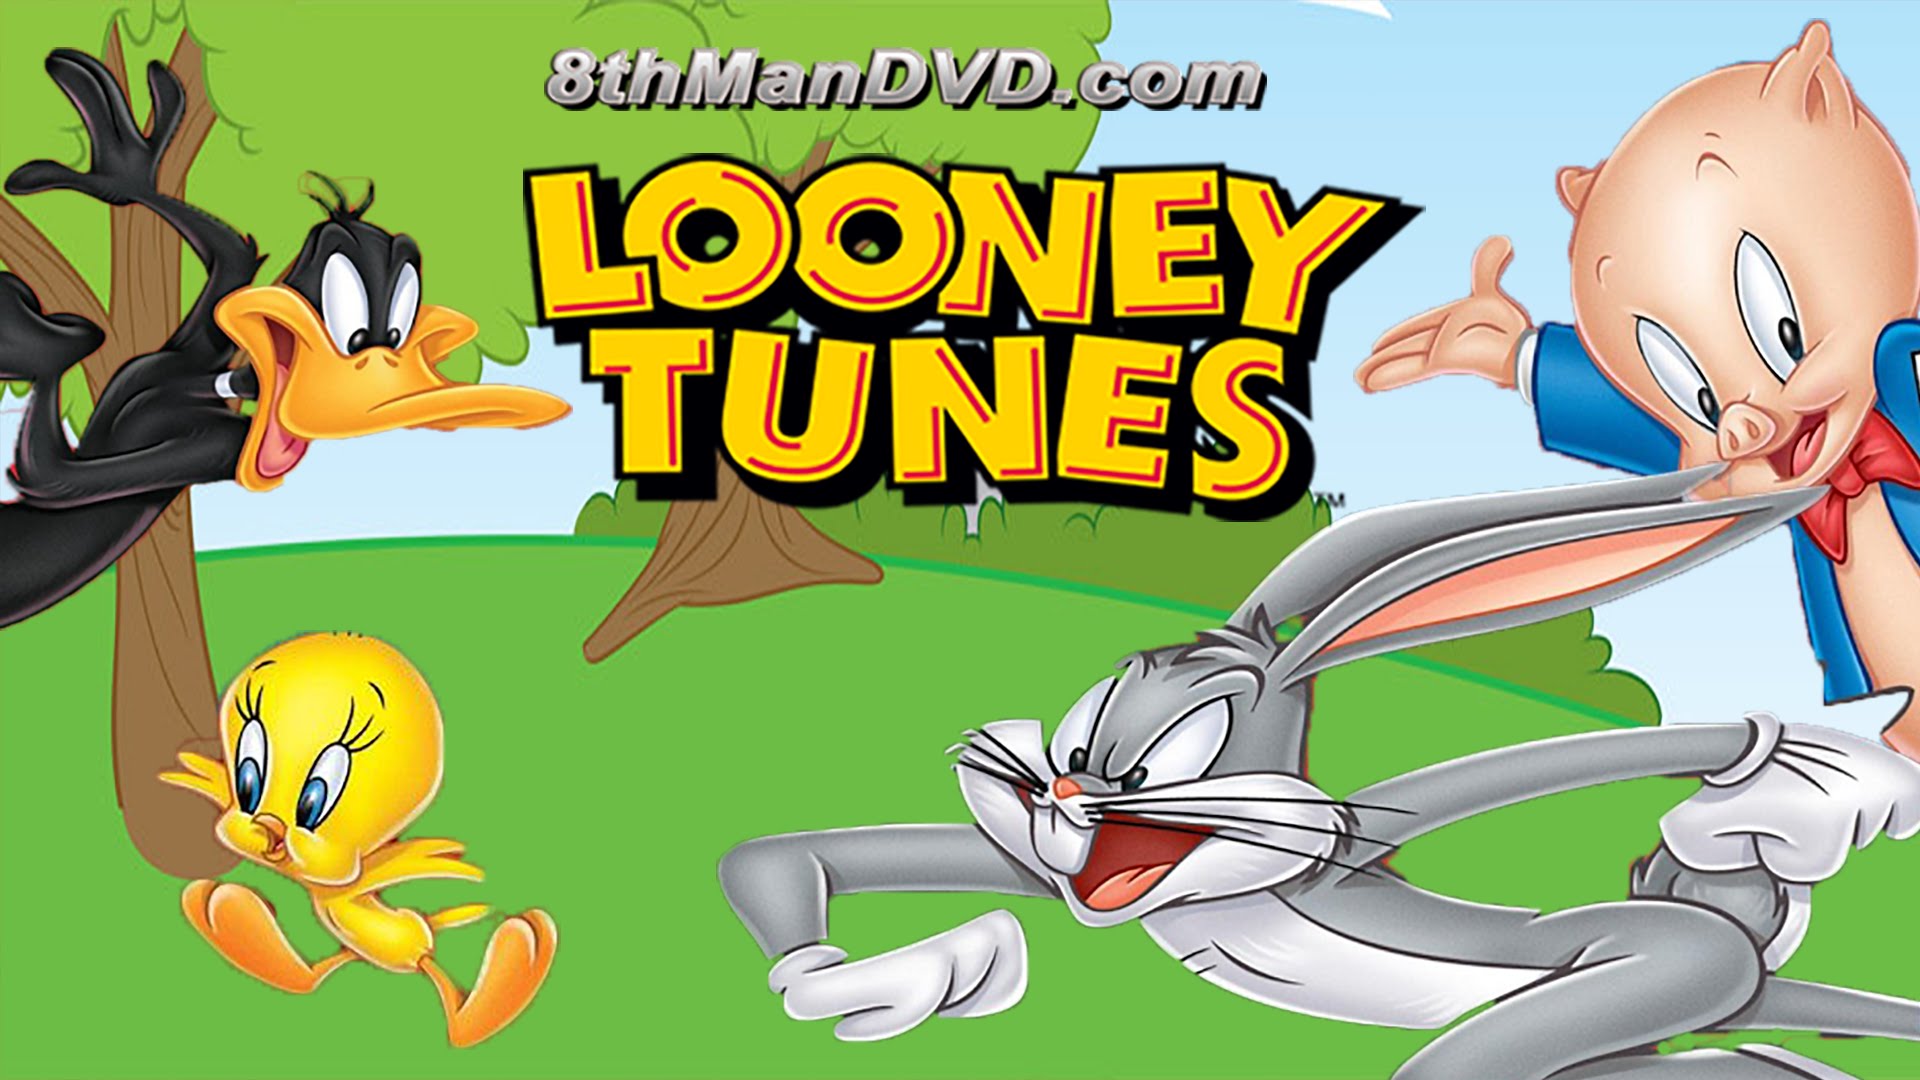 Looney Tunes wallpapers, Cartoon, HQ Looney Tunes pictures ...